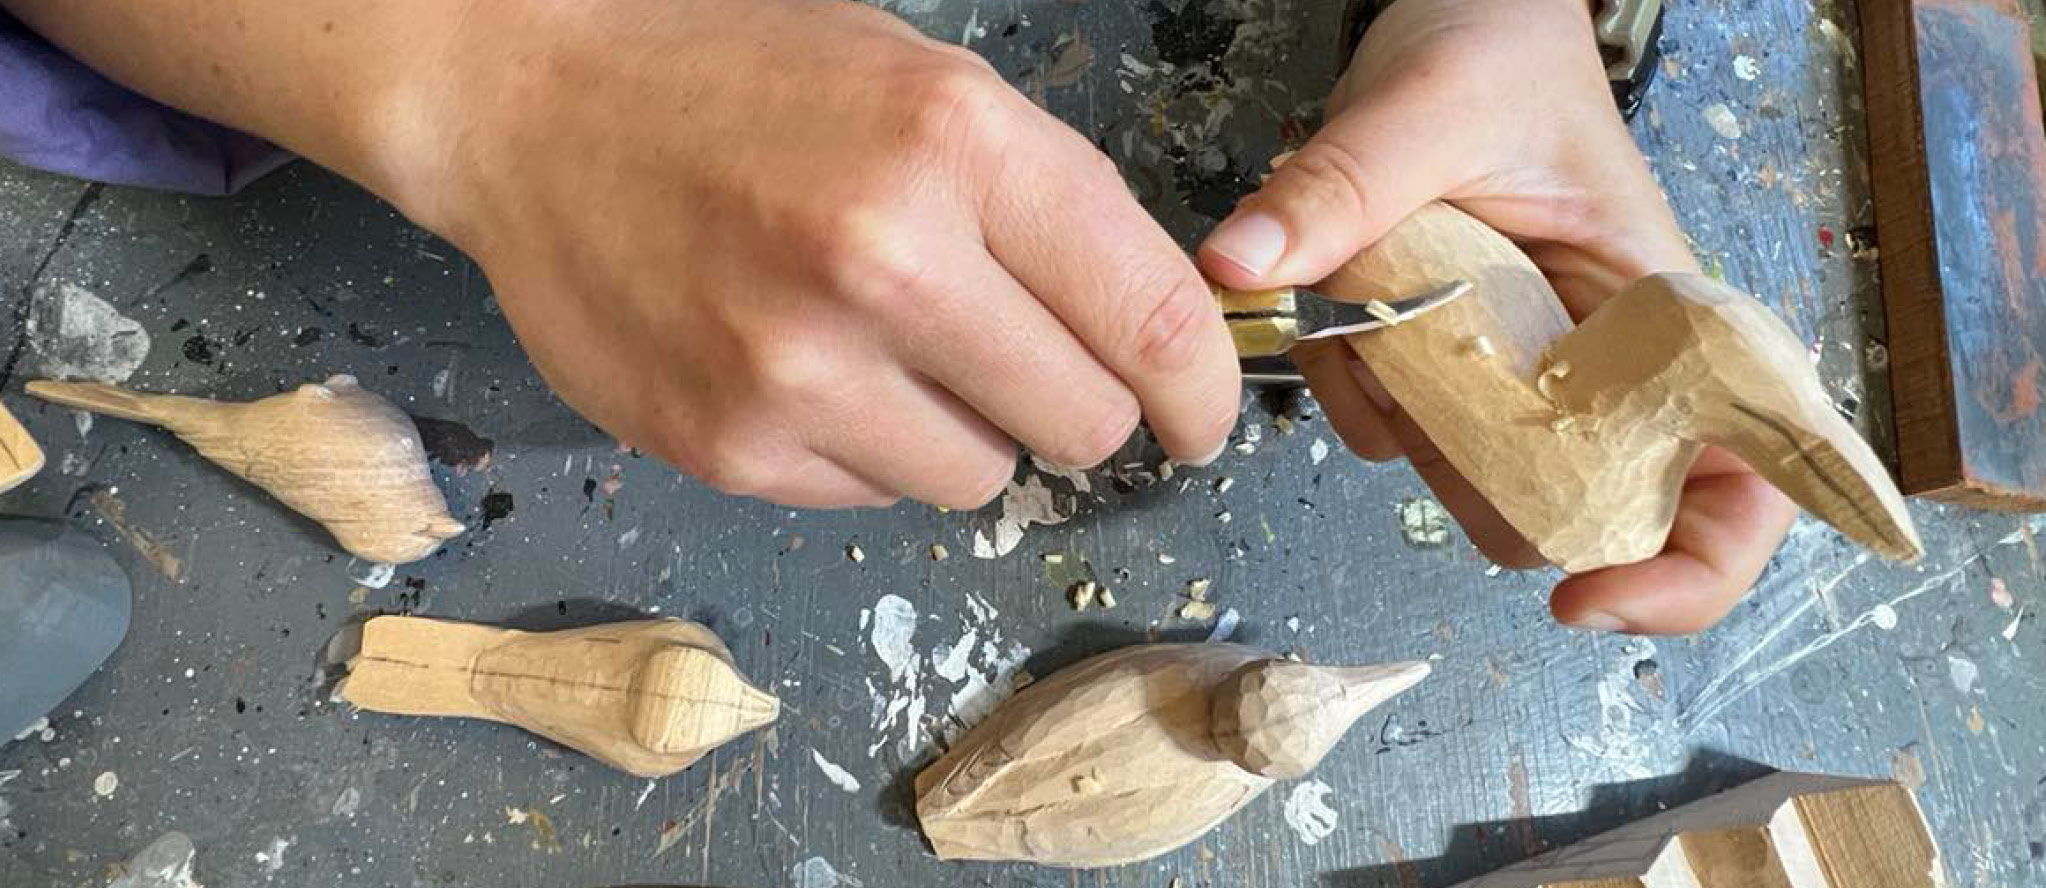 A close-up view of hands carving a block of wood into a bird